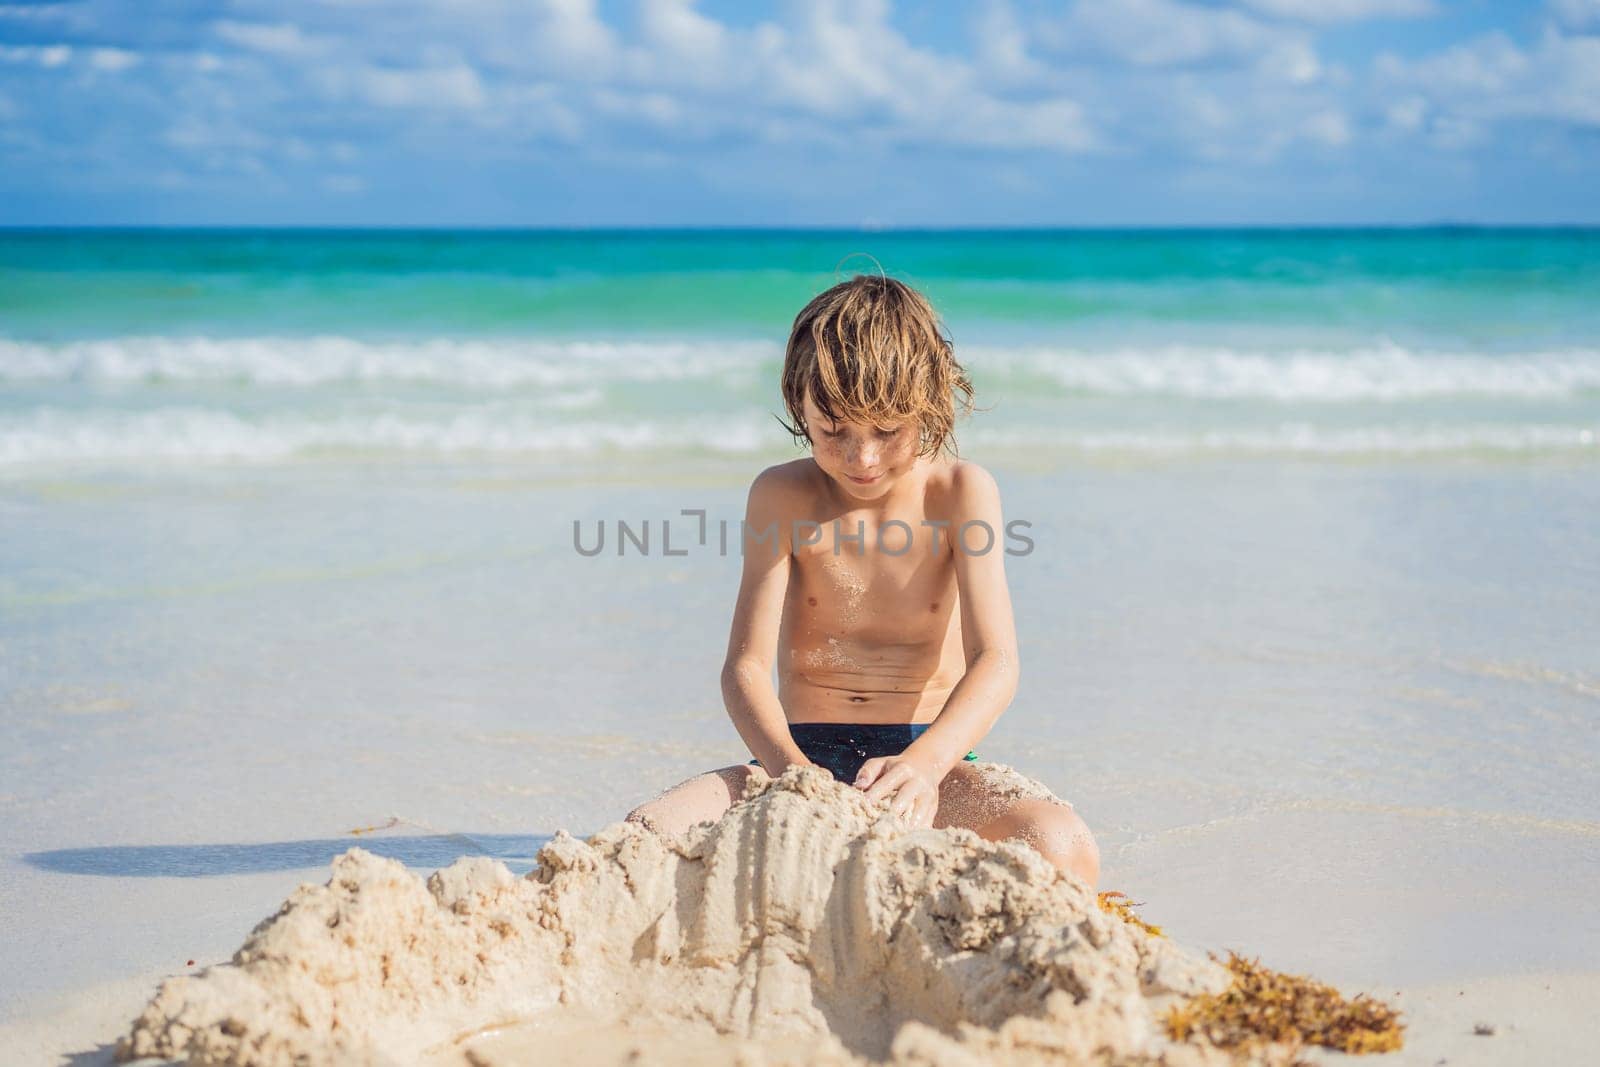 Young boy's pure delight as he explores the sandy playground of the beach, shaping dreams with grains of sand.